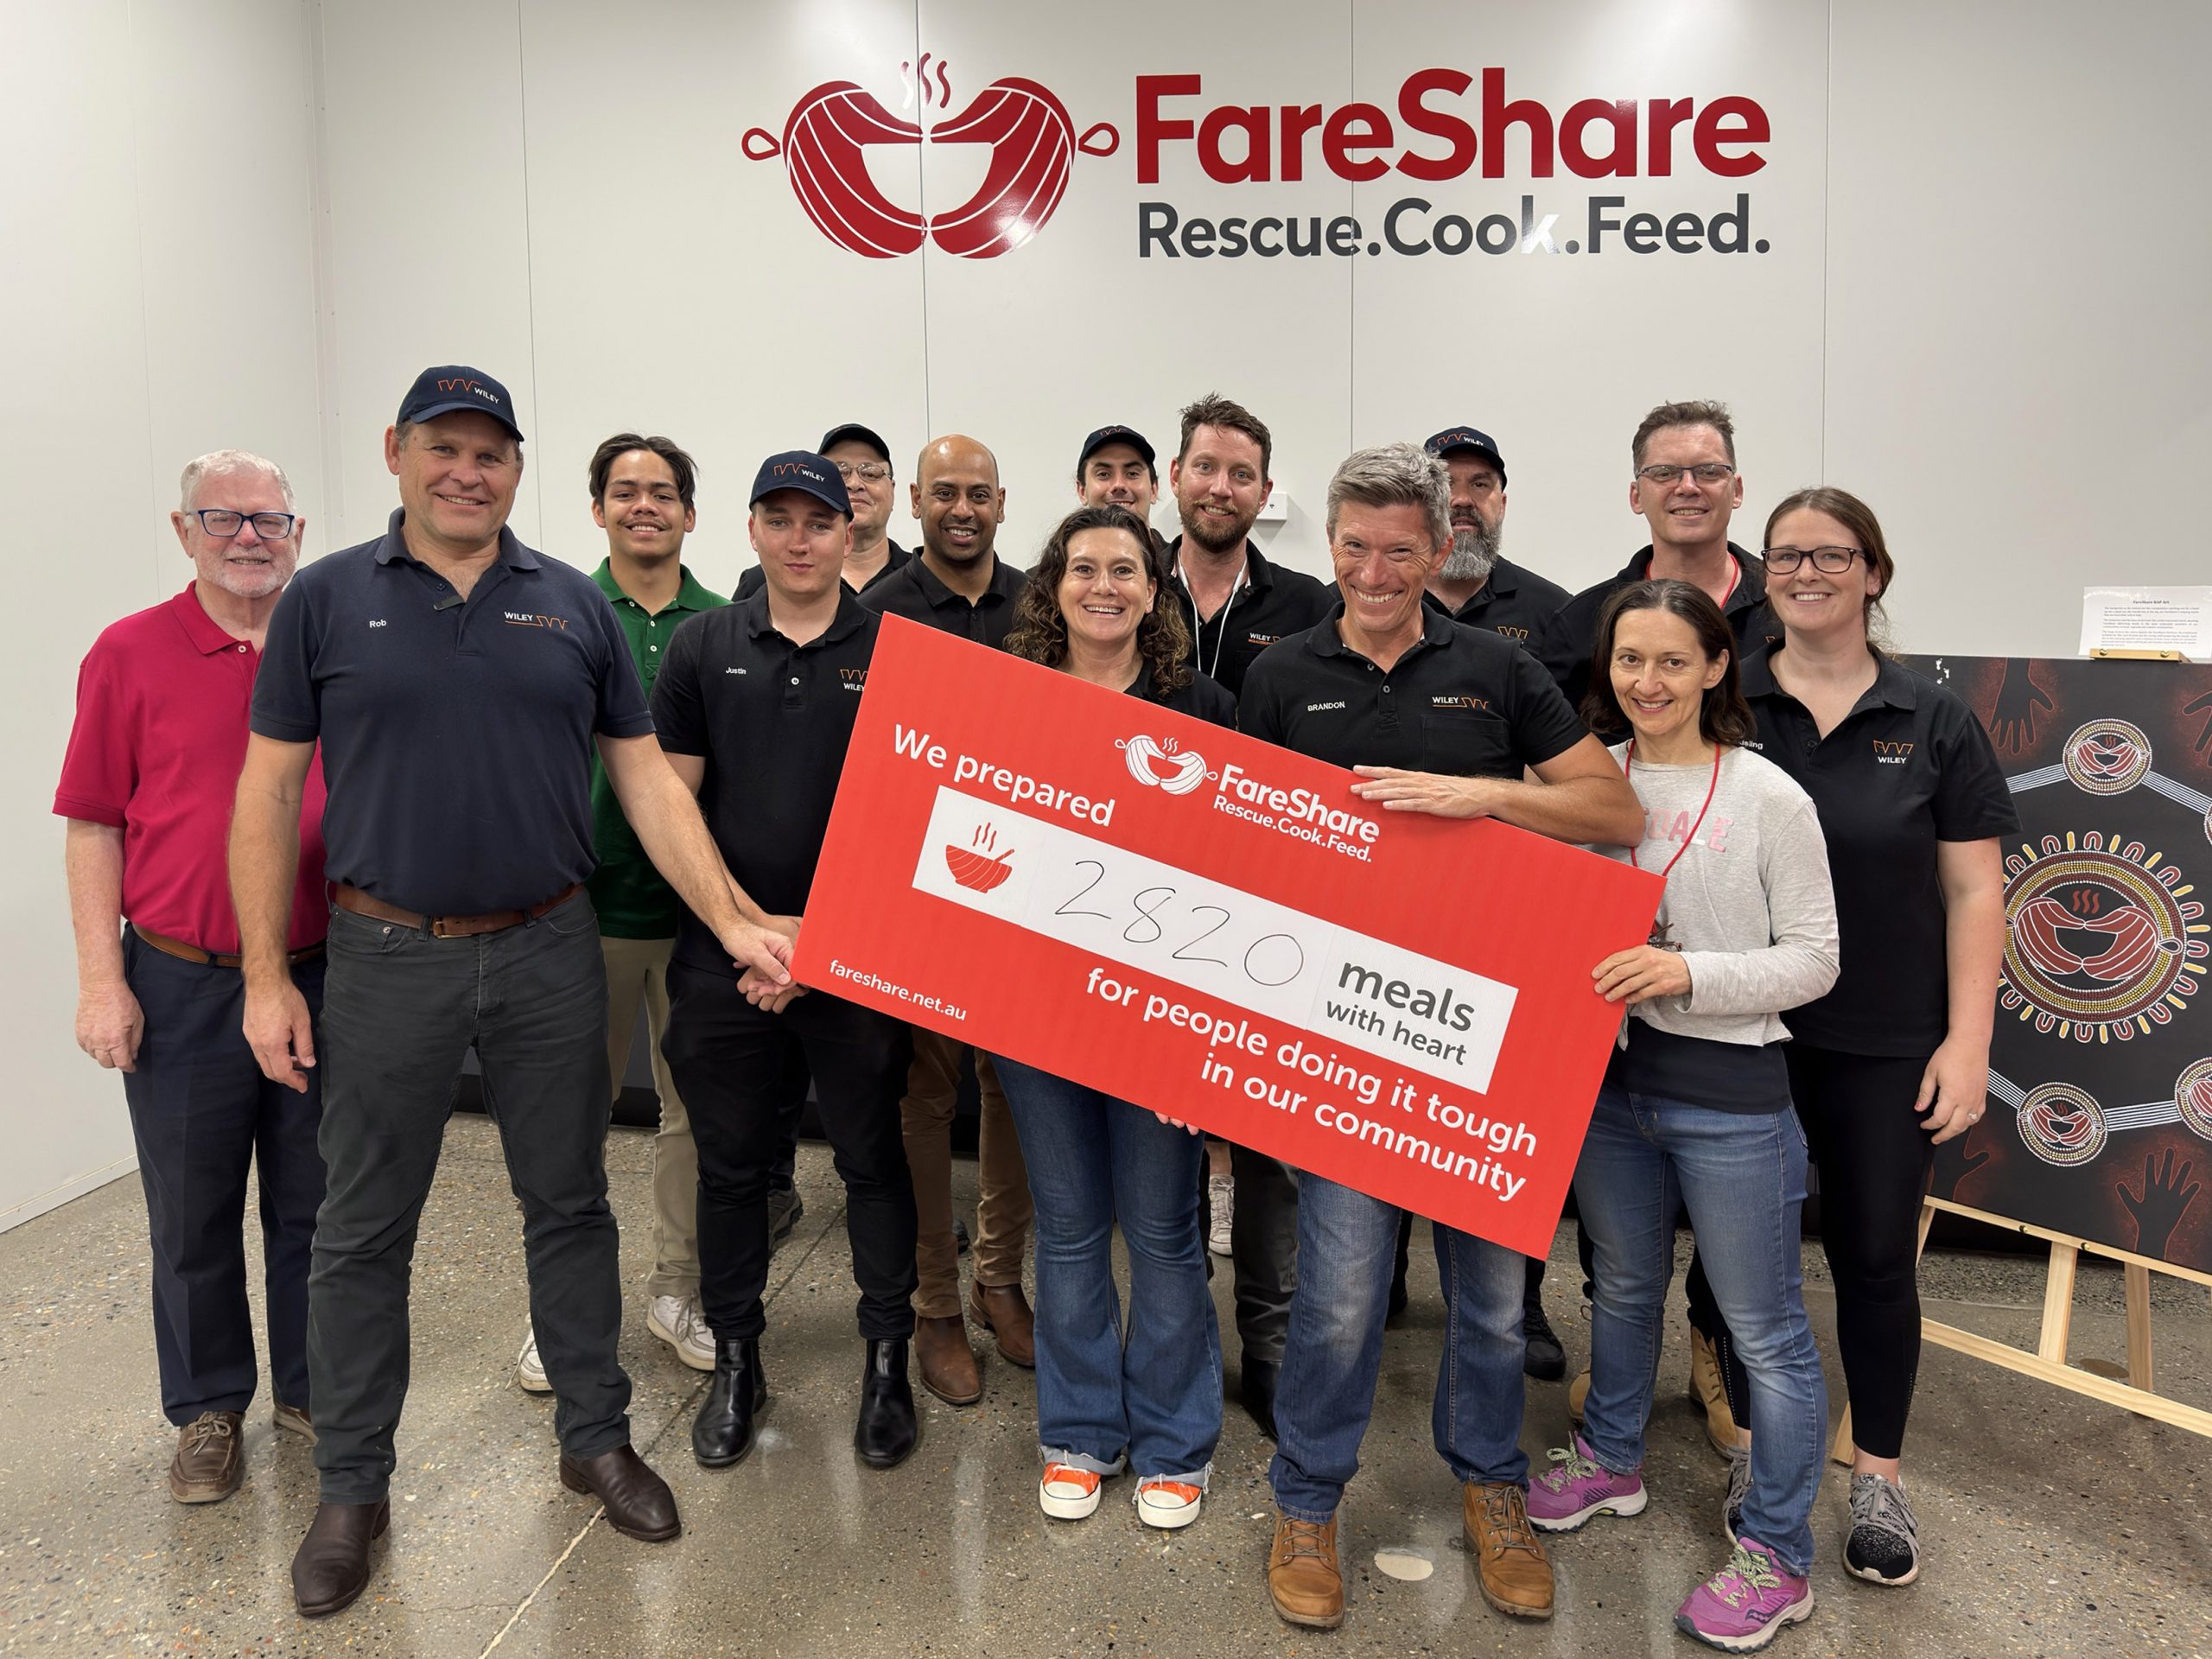 Wiley Team Volunteering at FareShare Brisbane Kitchen discover that they helped prepare and package 2,800 nutritous meals